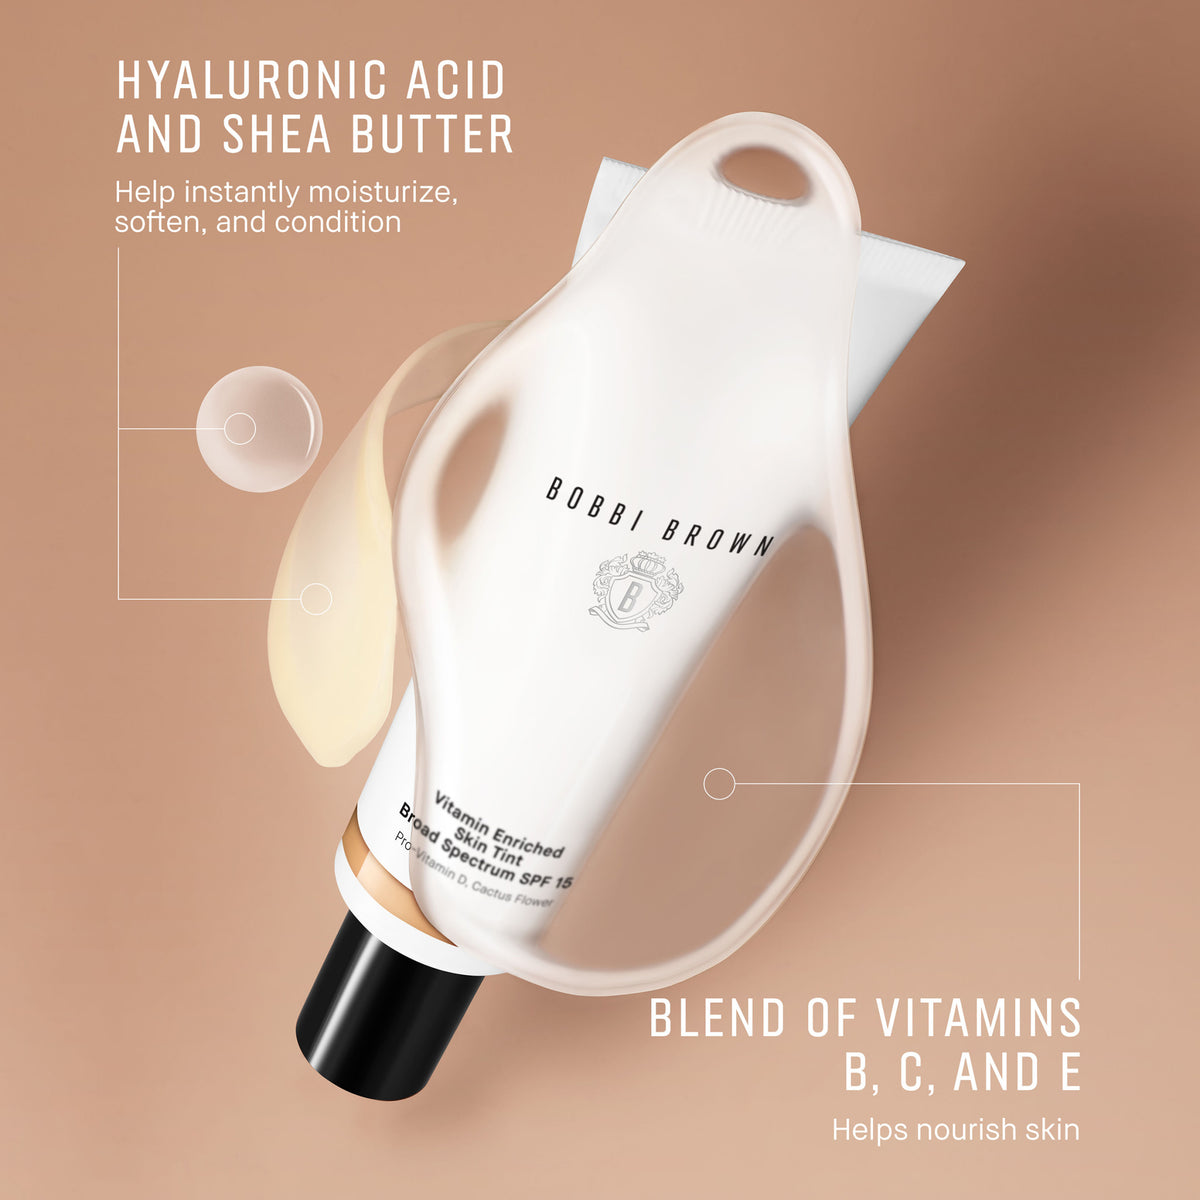 Bobbi Brown Vitamin Enriched Hydrating Skin Tint SPF 15 with Hyaluronic Acid . This product is for light complexions